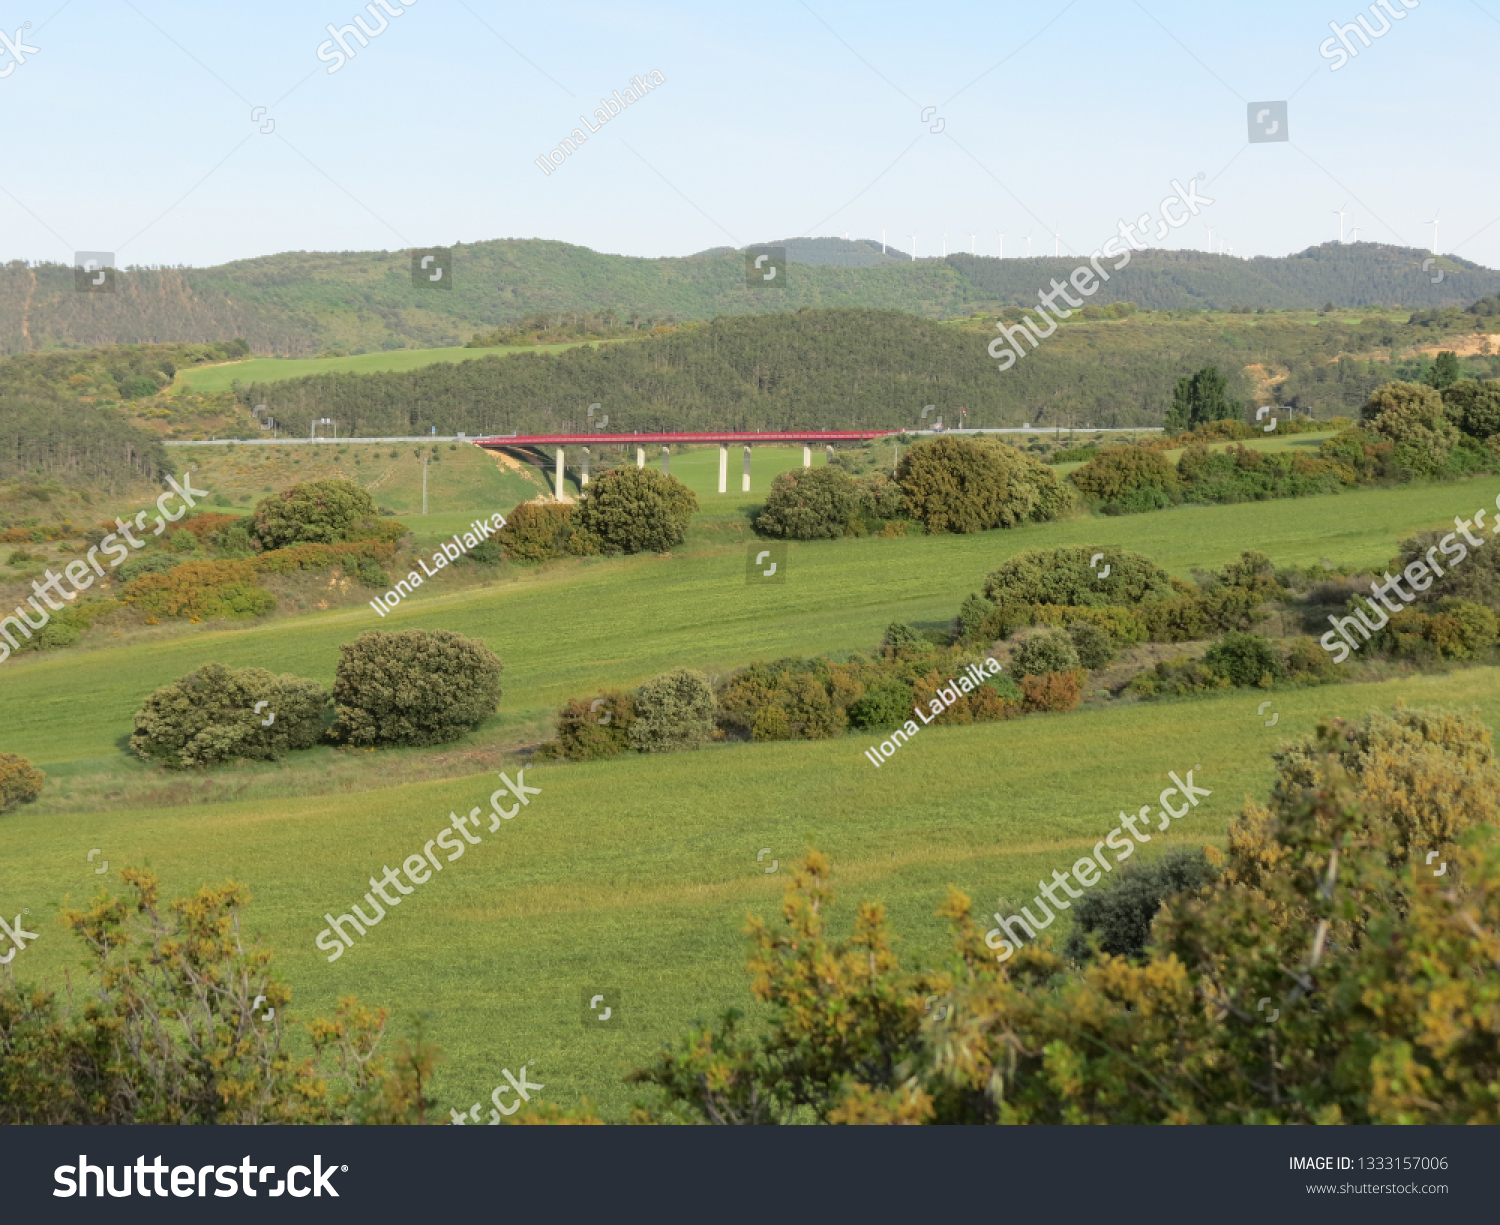 Panoramic Navarra (Spain) landscape with green meadows and modern red bridge in the distance #1333157006